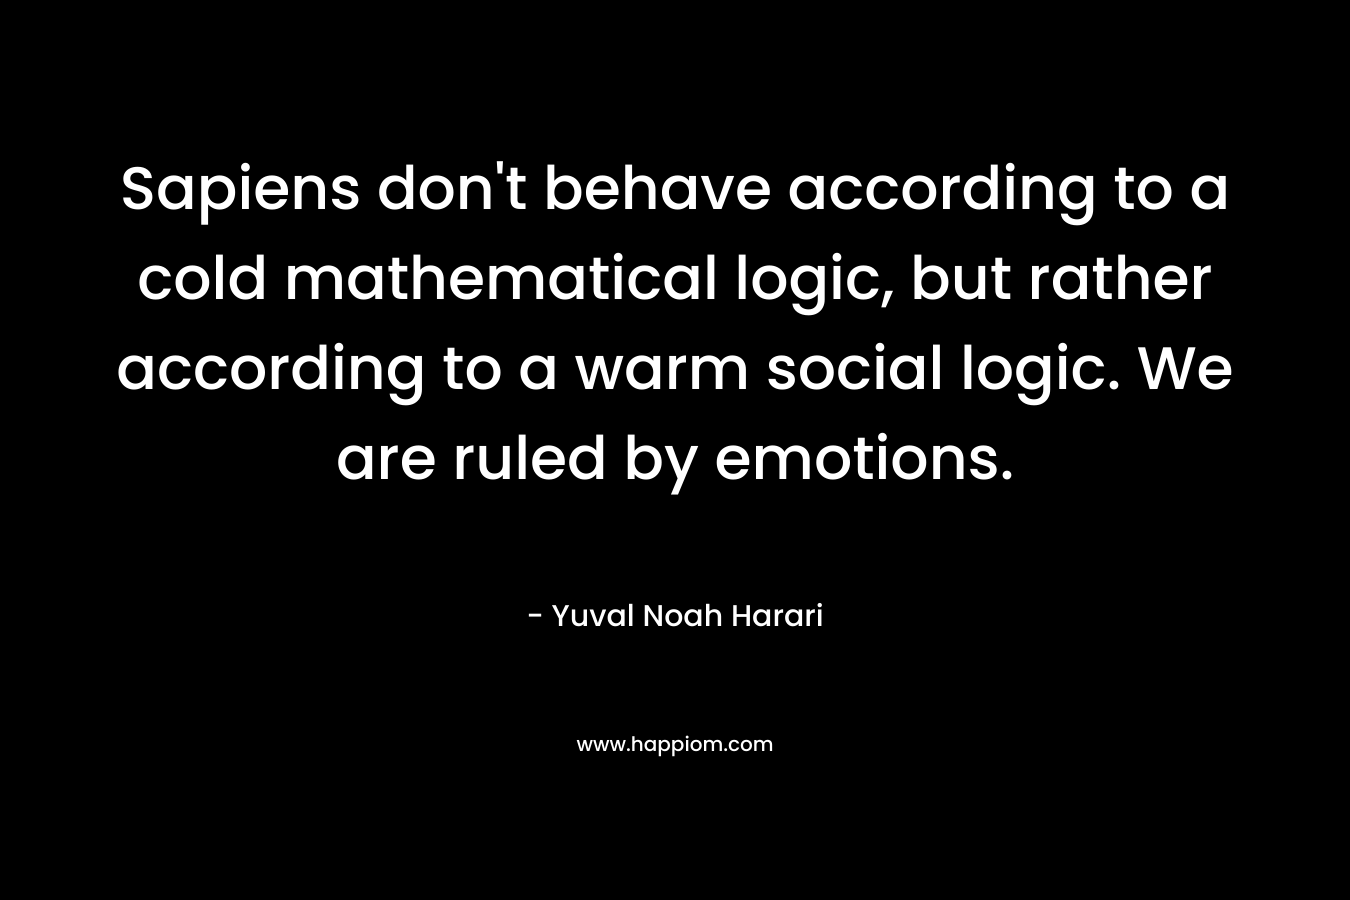 Sapiens don't behave according to a cold mathematical logic, but rather according to a warm social logic. We are ruled by emotions.